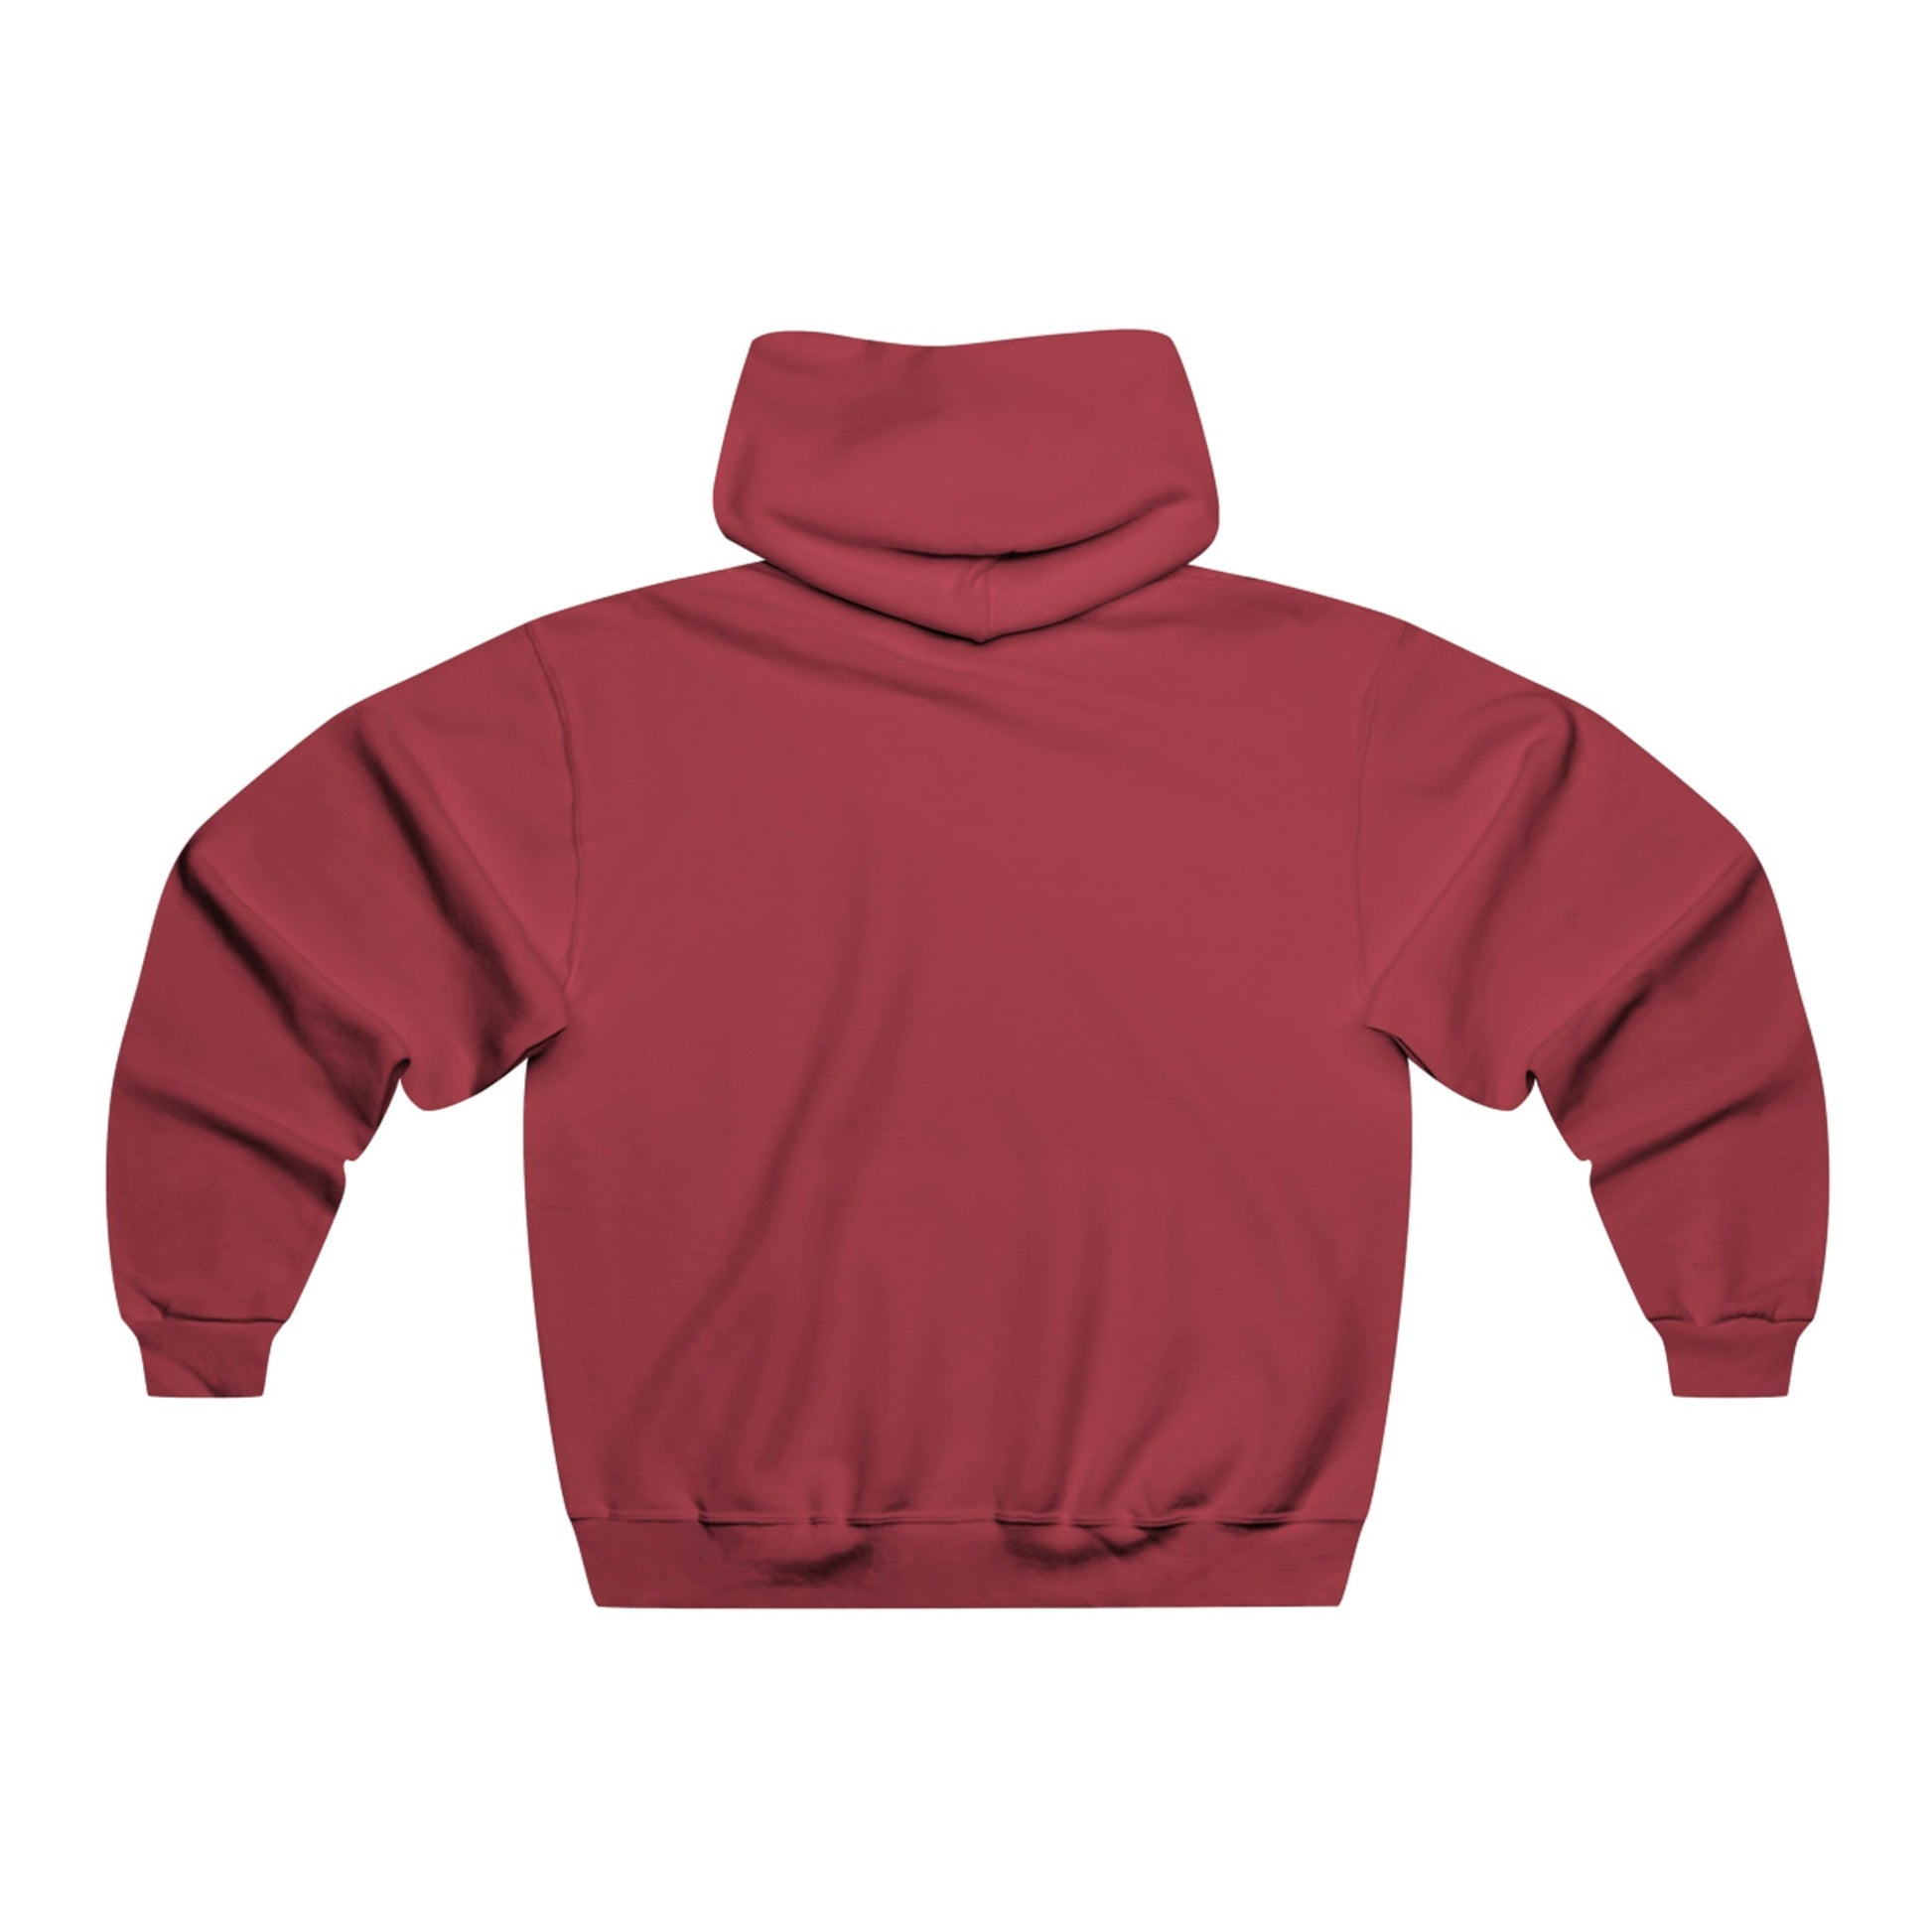 If I Were The Devil NUBLEND® Hooded Sweatshirt - Premium Hoodie - Just $55! Shop now at Who Touched The Thermostat?